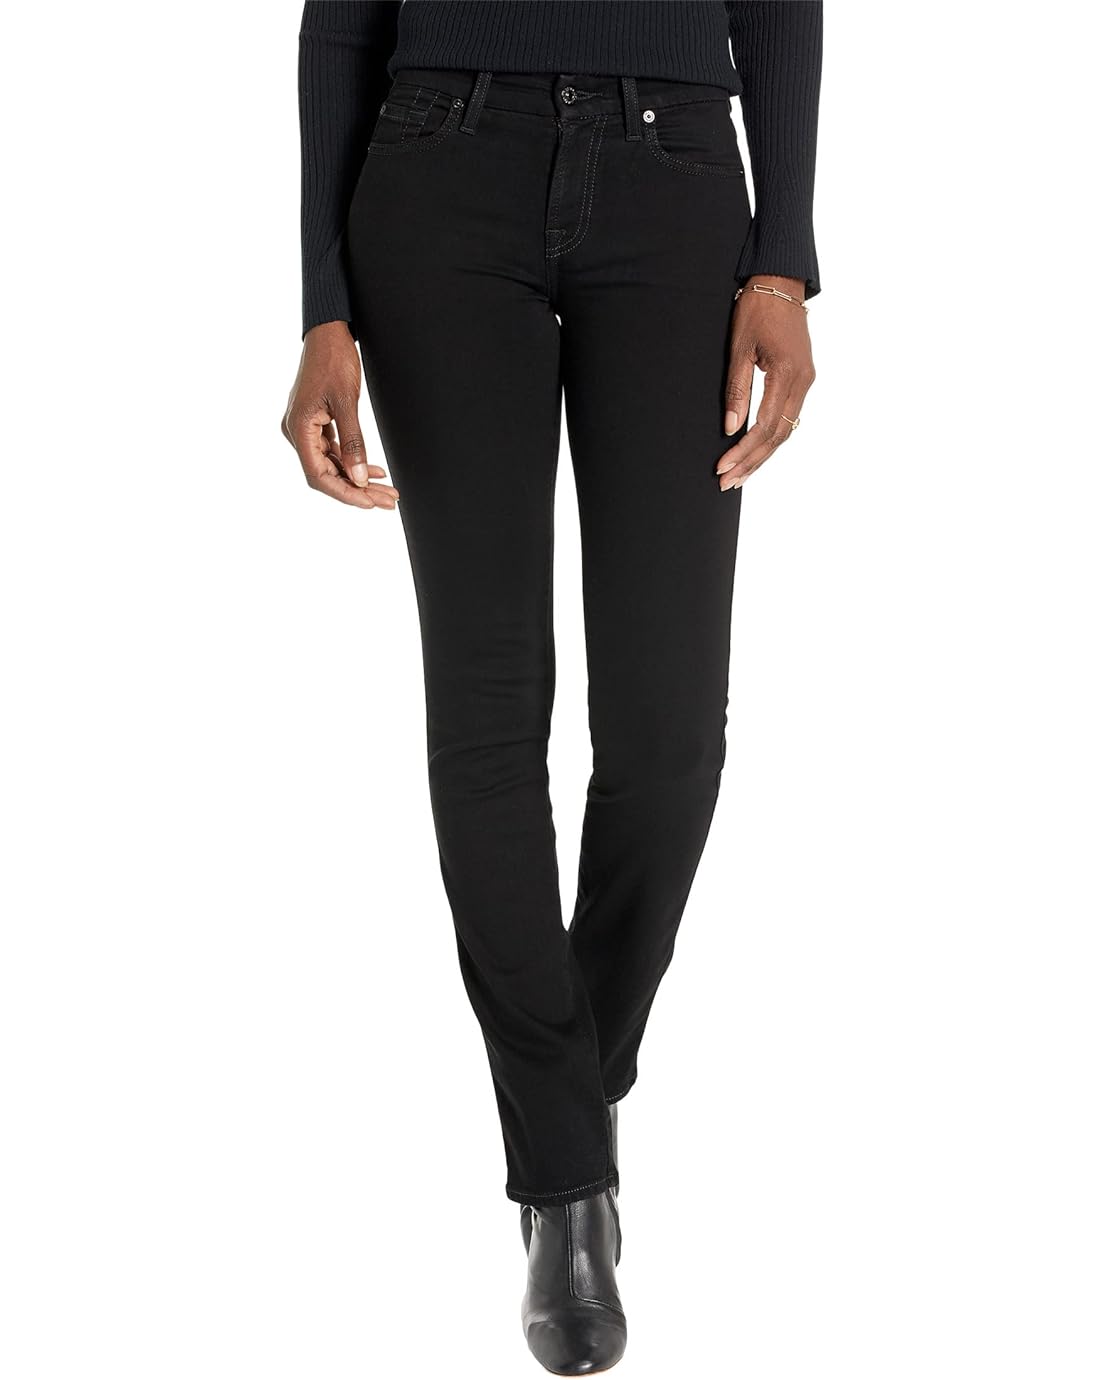  7 For All Mankind B(air) Kimmie Straight in Rinse Black